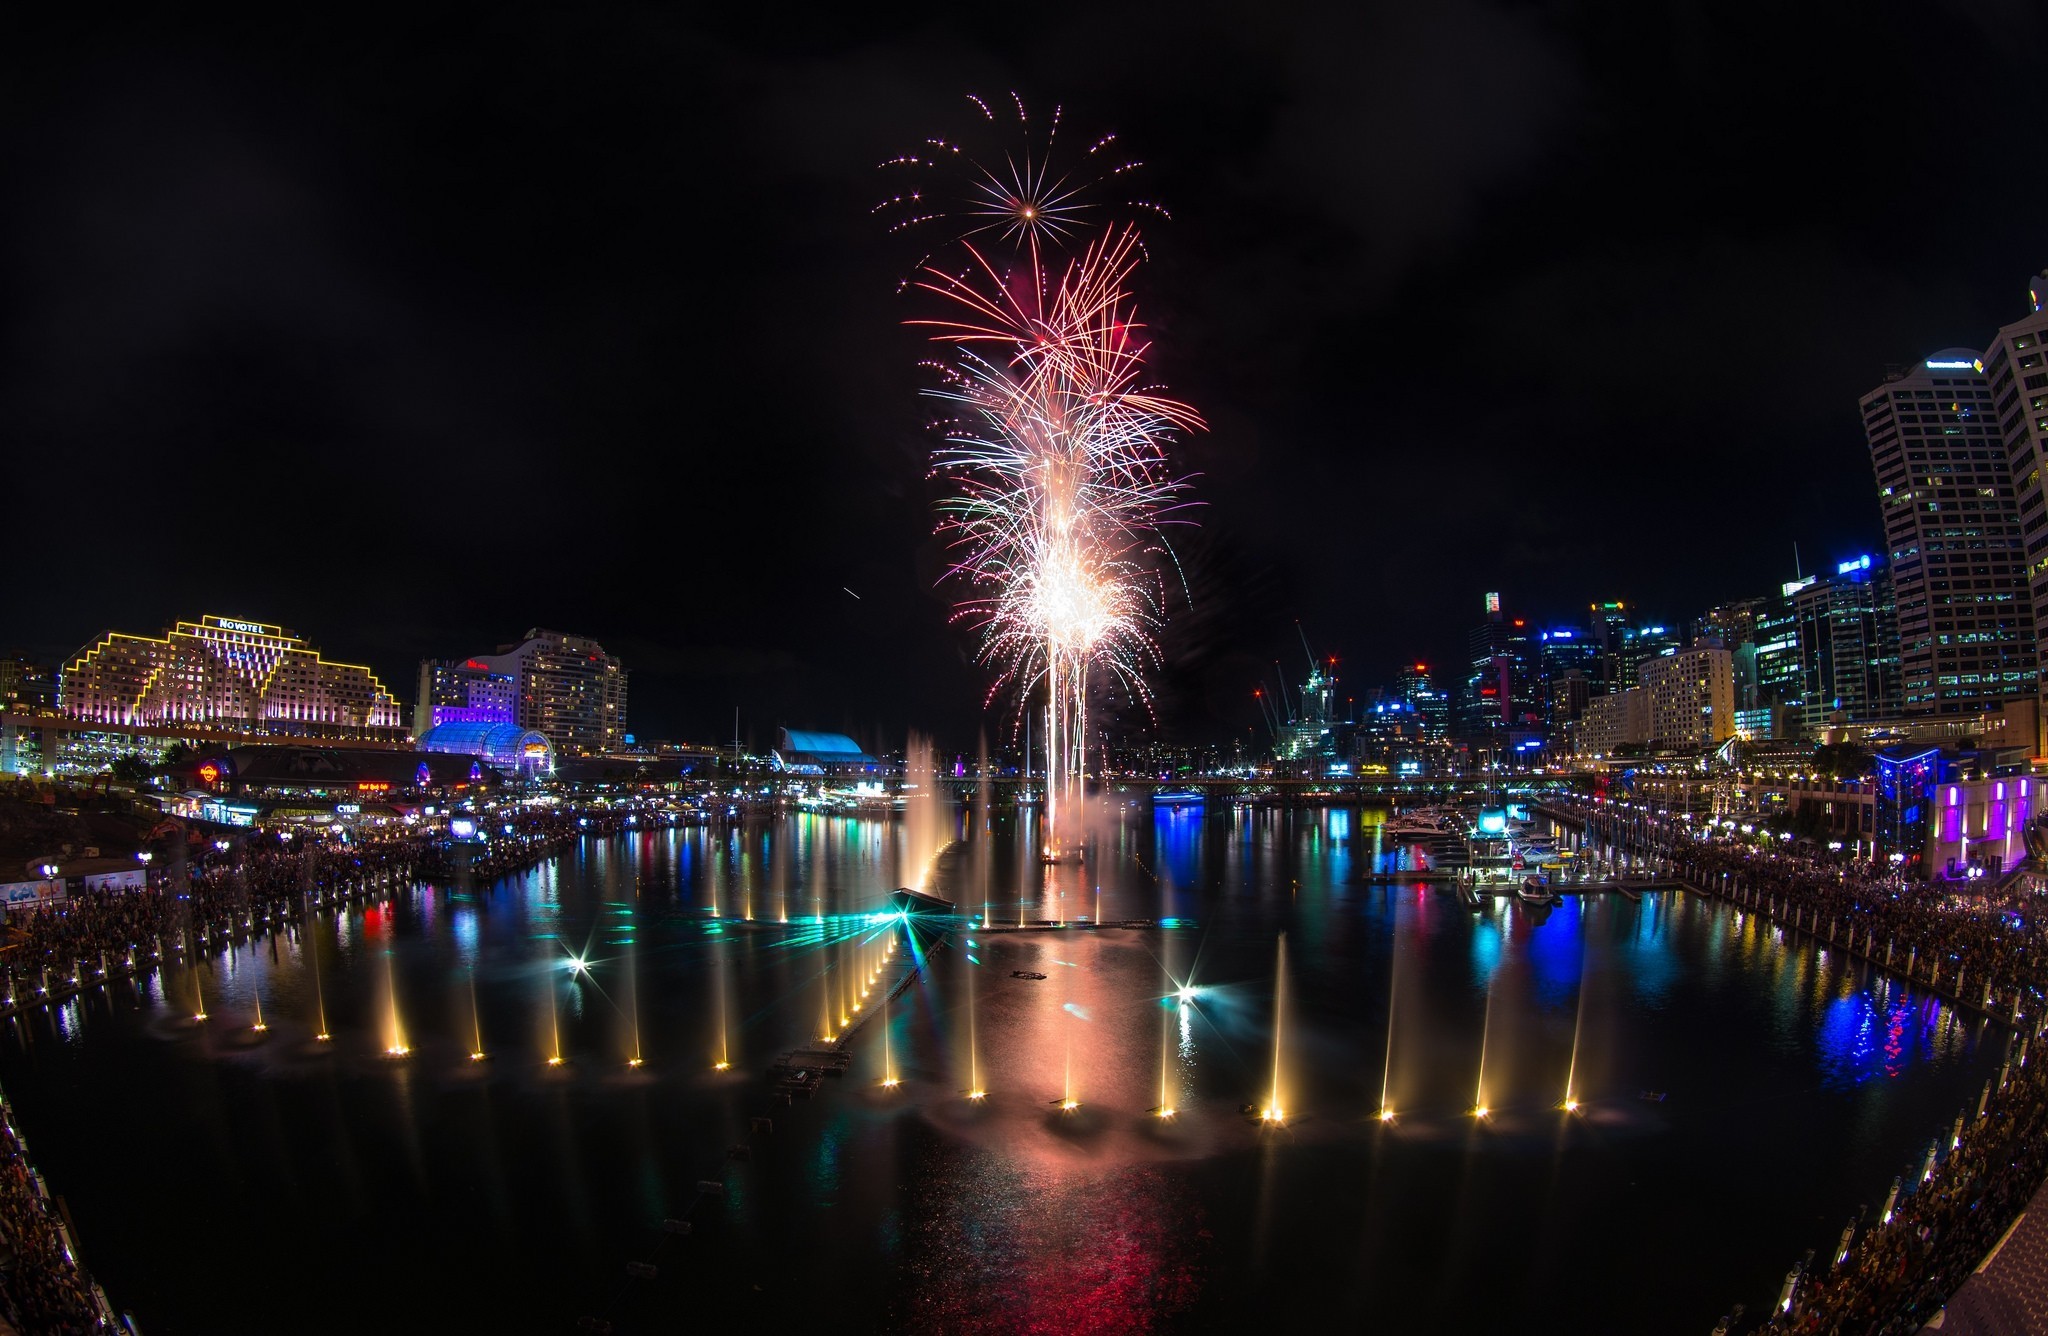 sydney, man made, australia, darling harbour, fireworks, fountain, cities